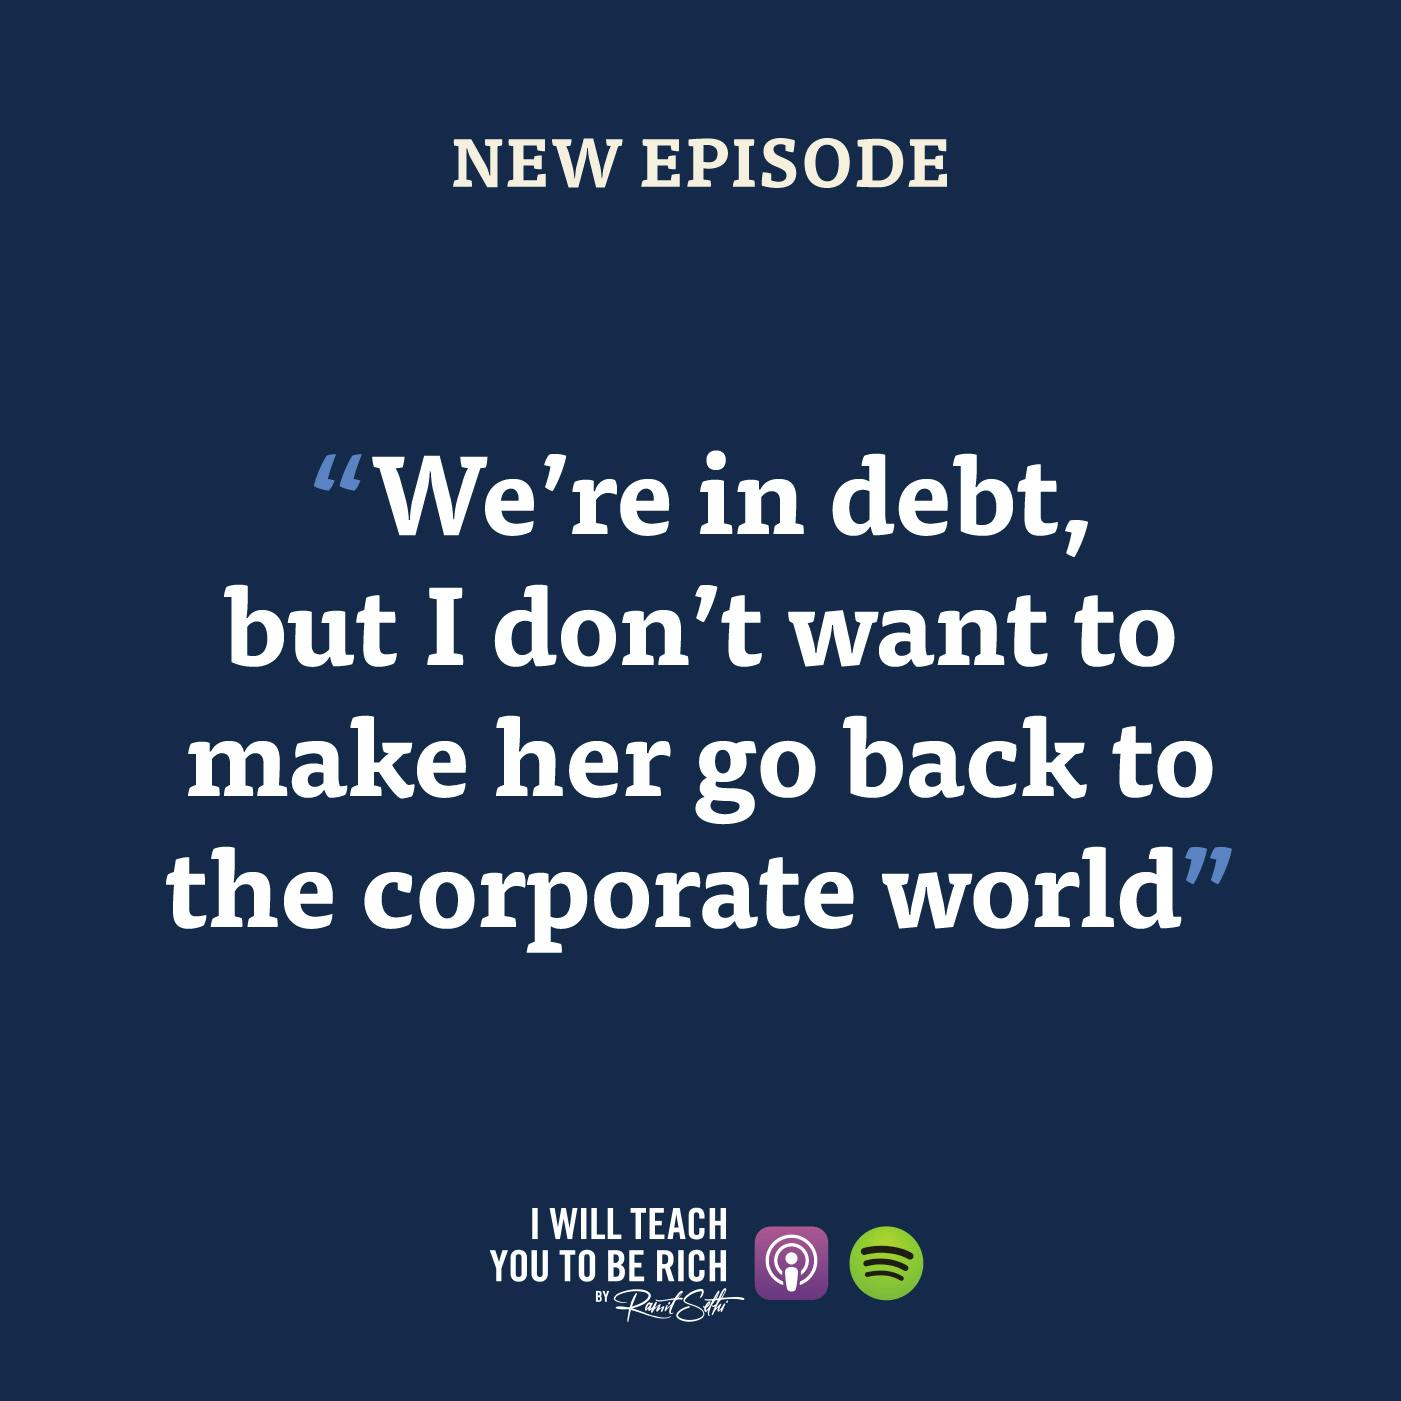 33. “We’re in debt, but I don’t want to make her go back to the corporate world”